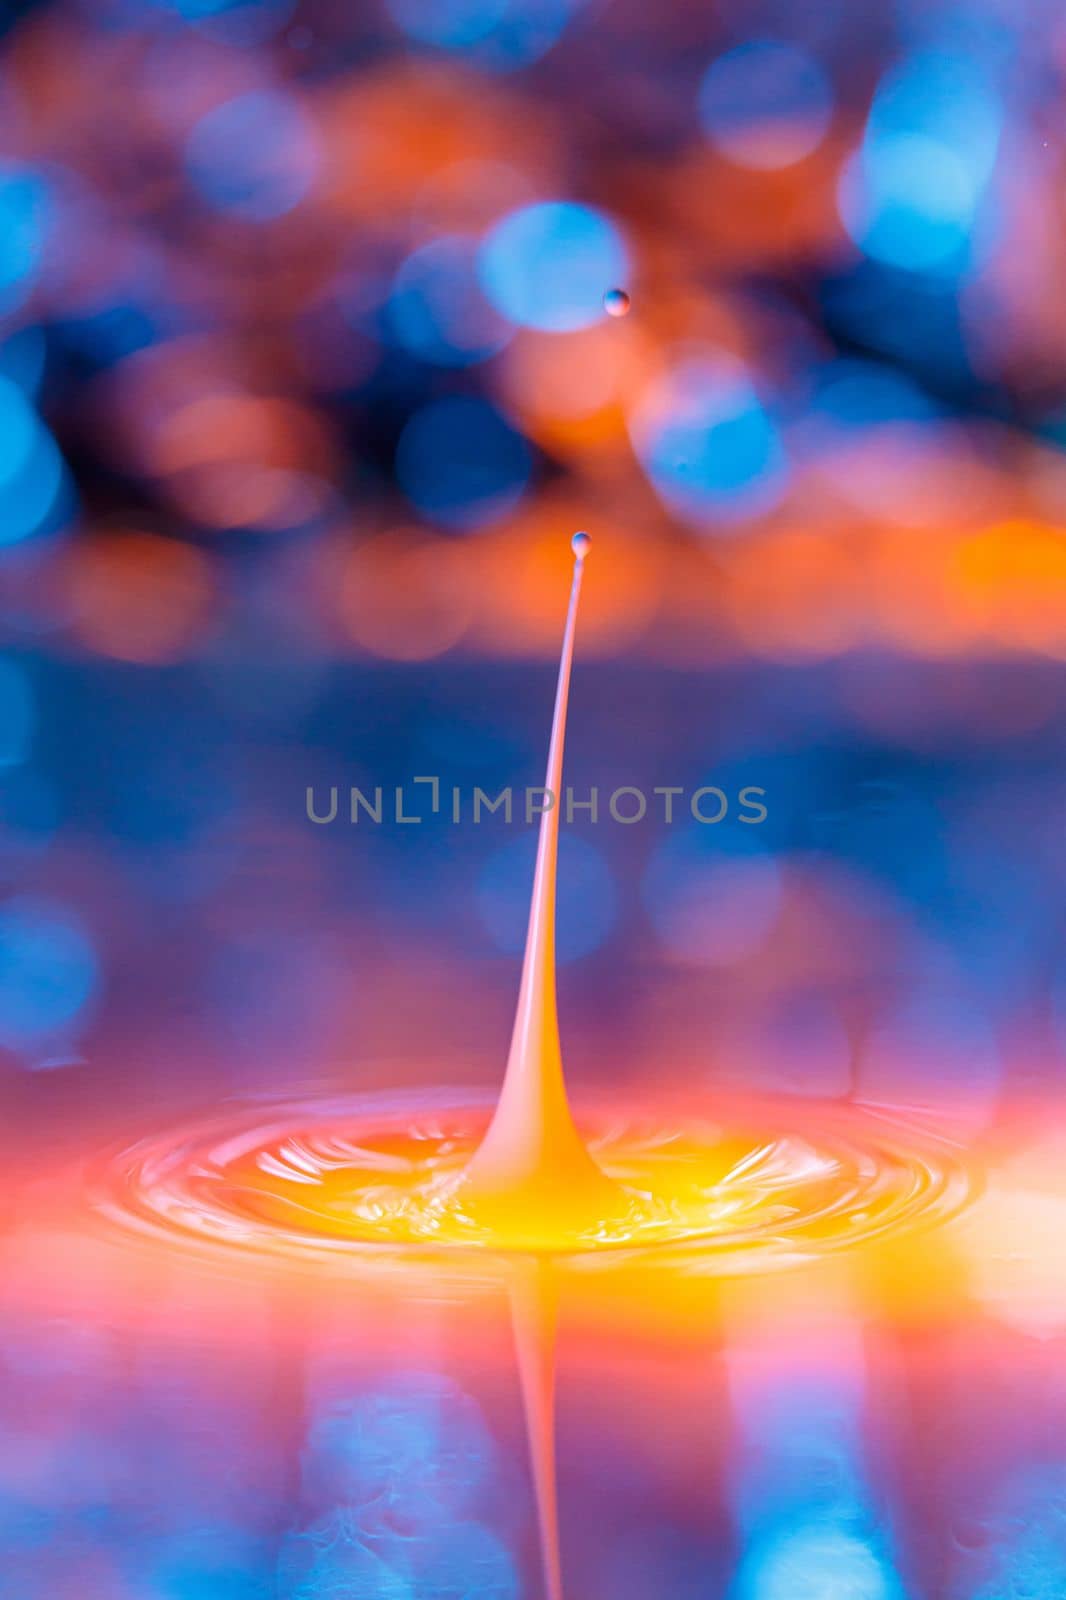 The drop falls into a dense liquid with a blue-yellow background. Abstract colorful background